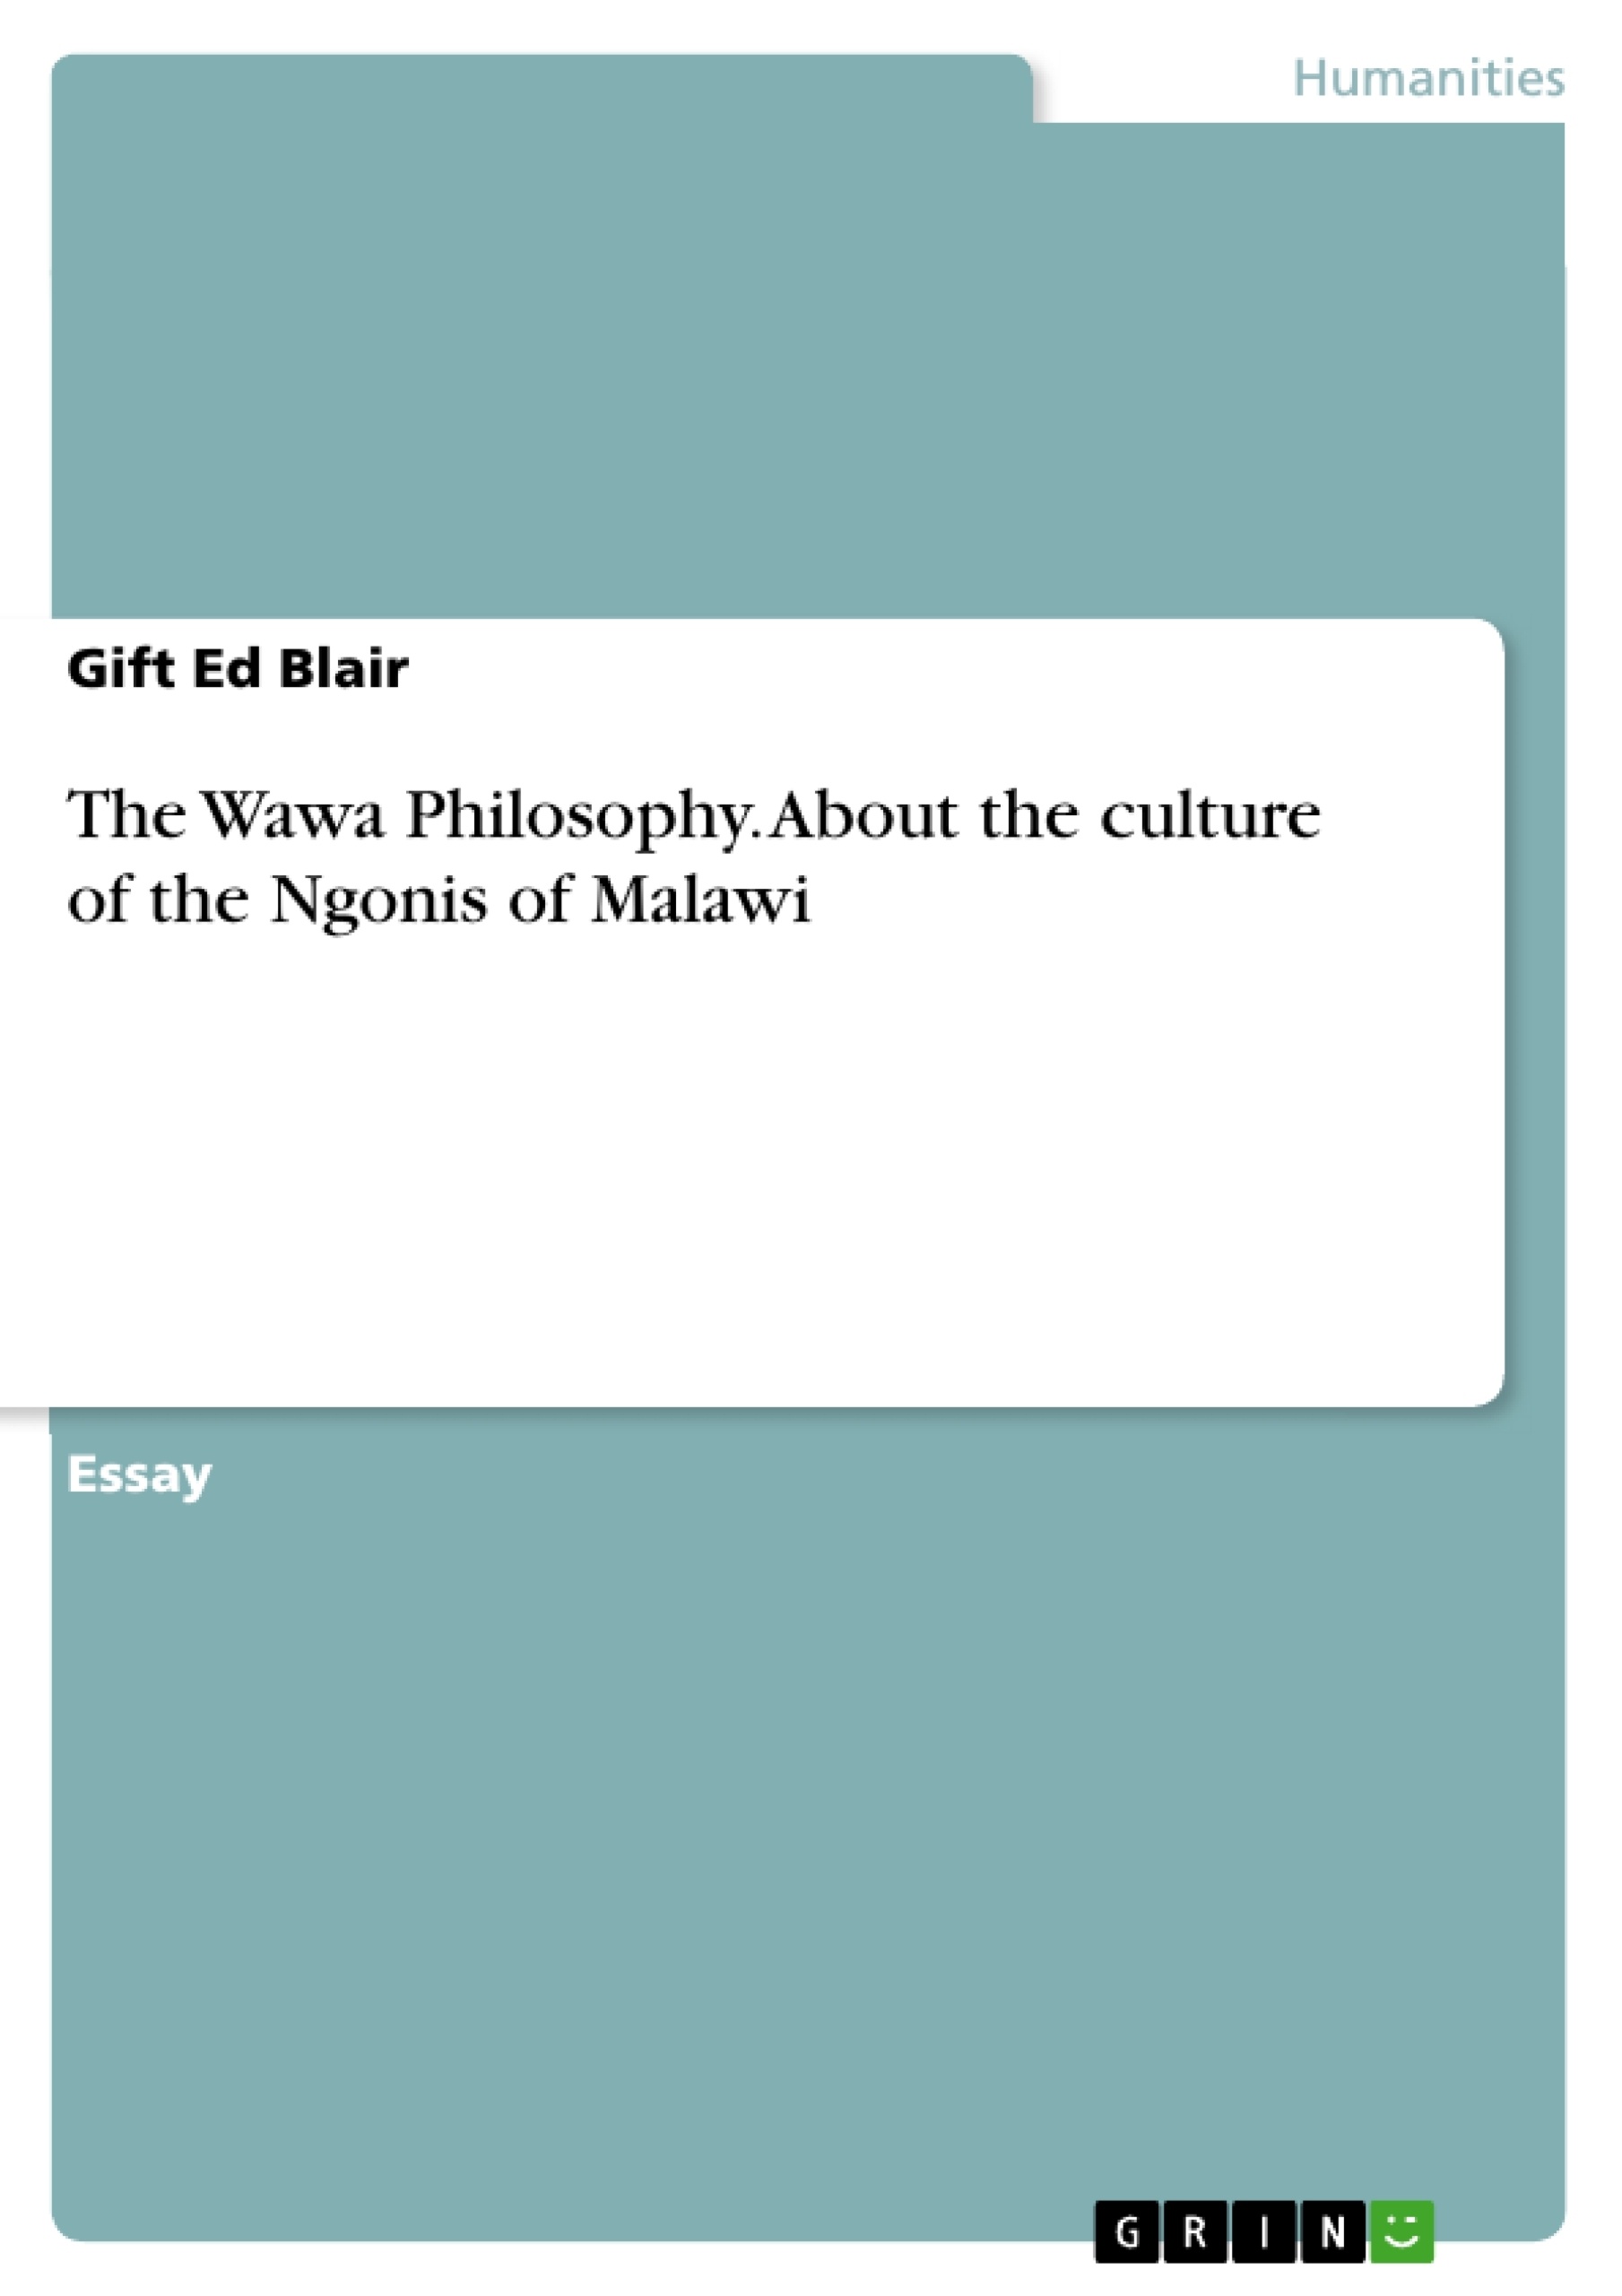 Título: The Wawa Philosophy. About the culture of the Ngonis of Malawi